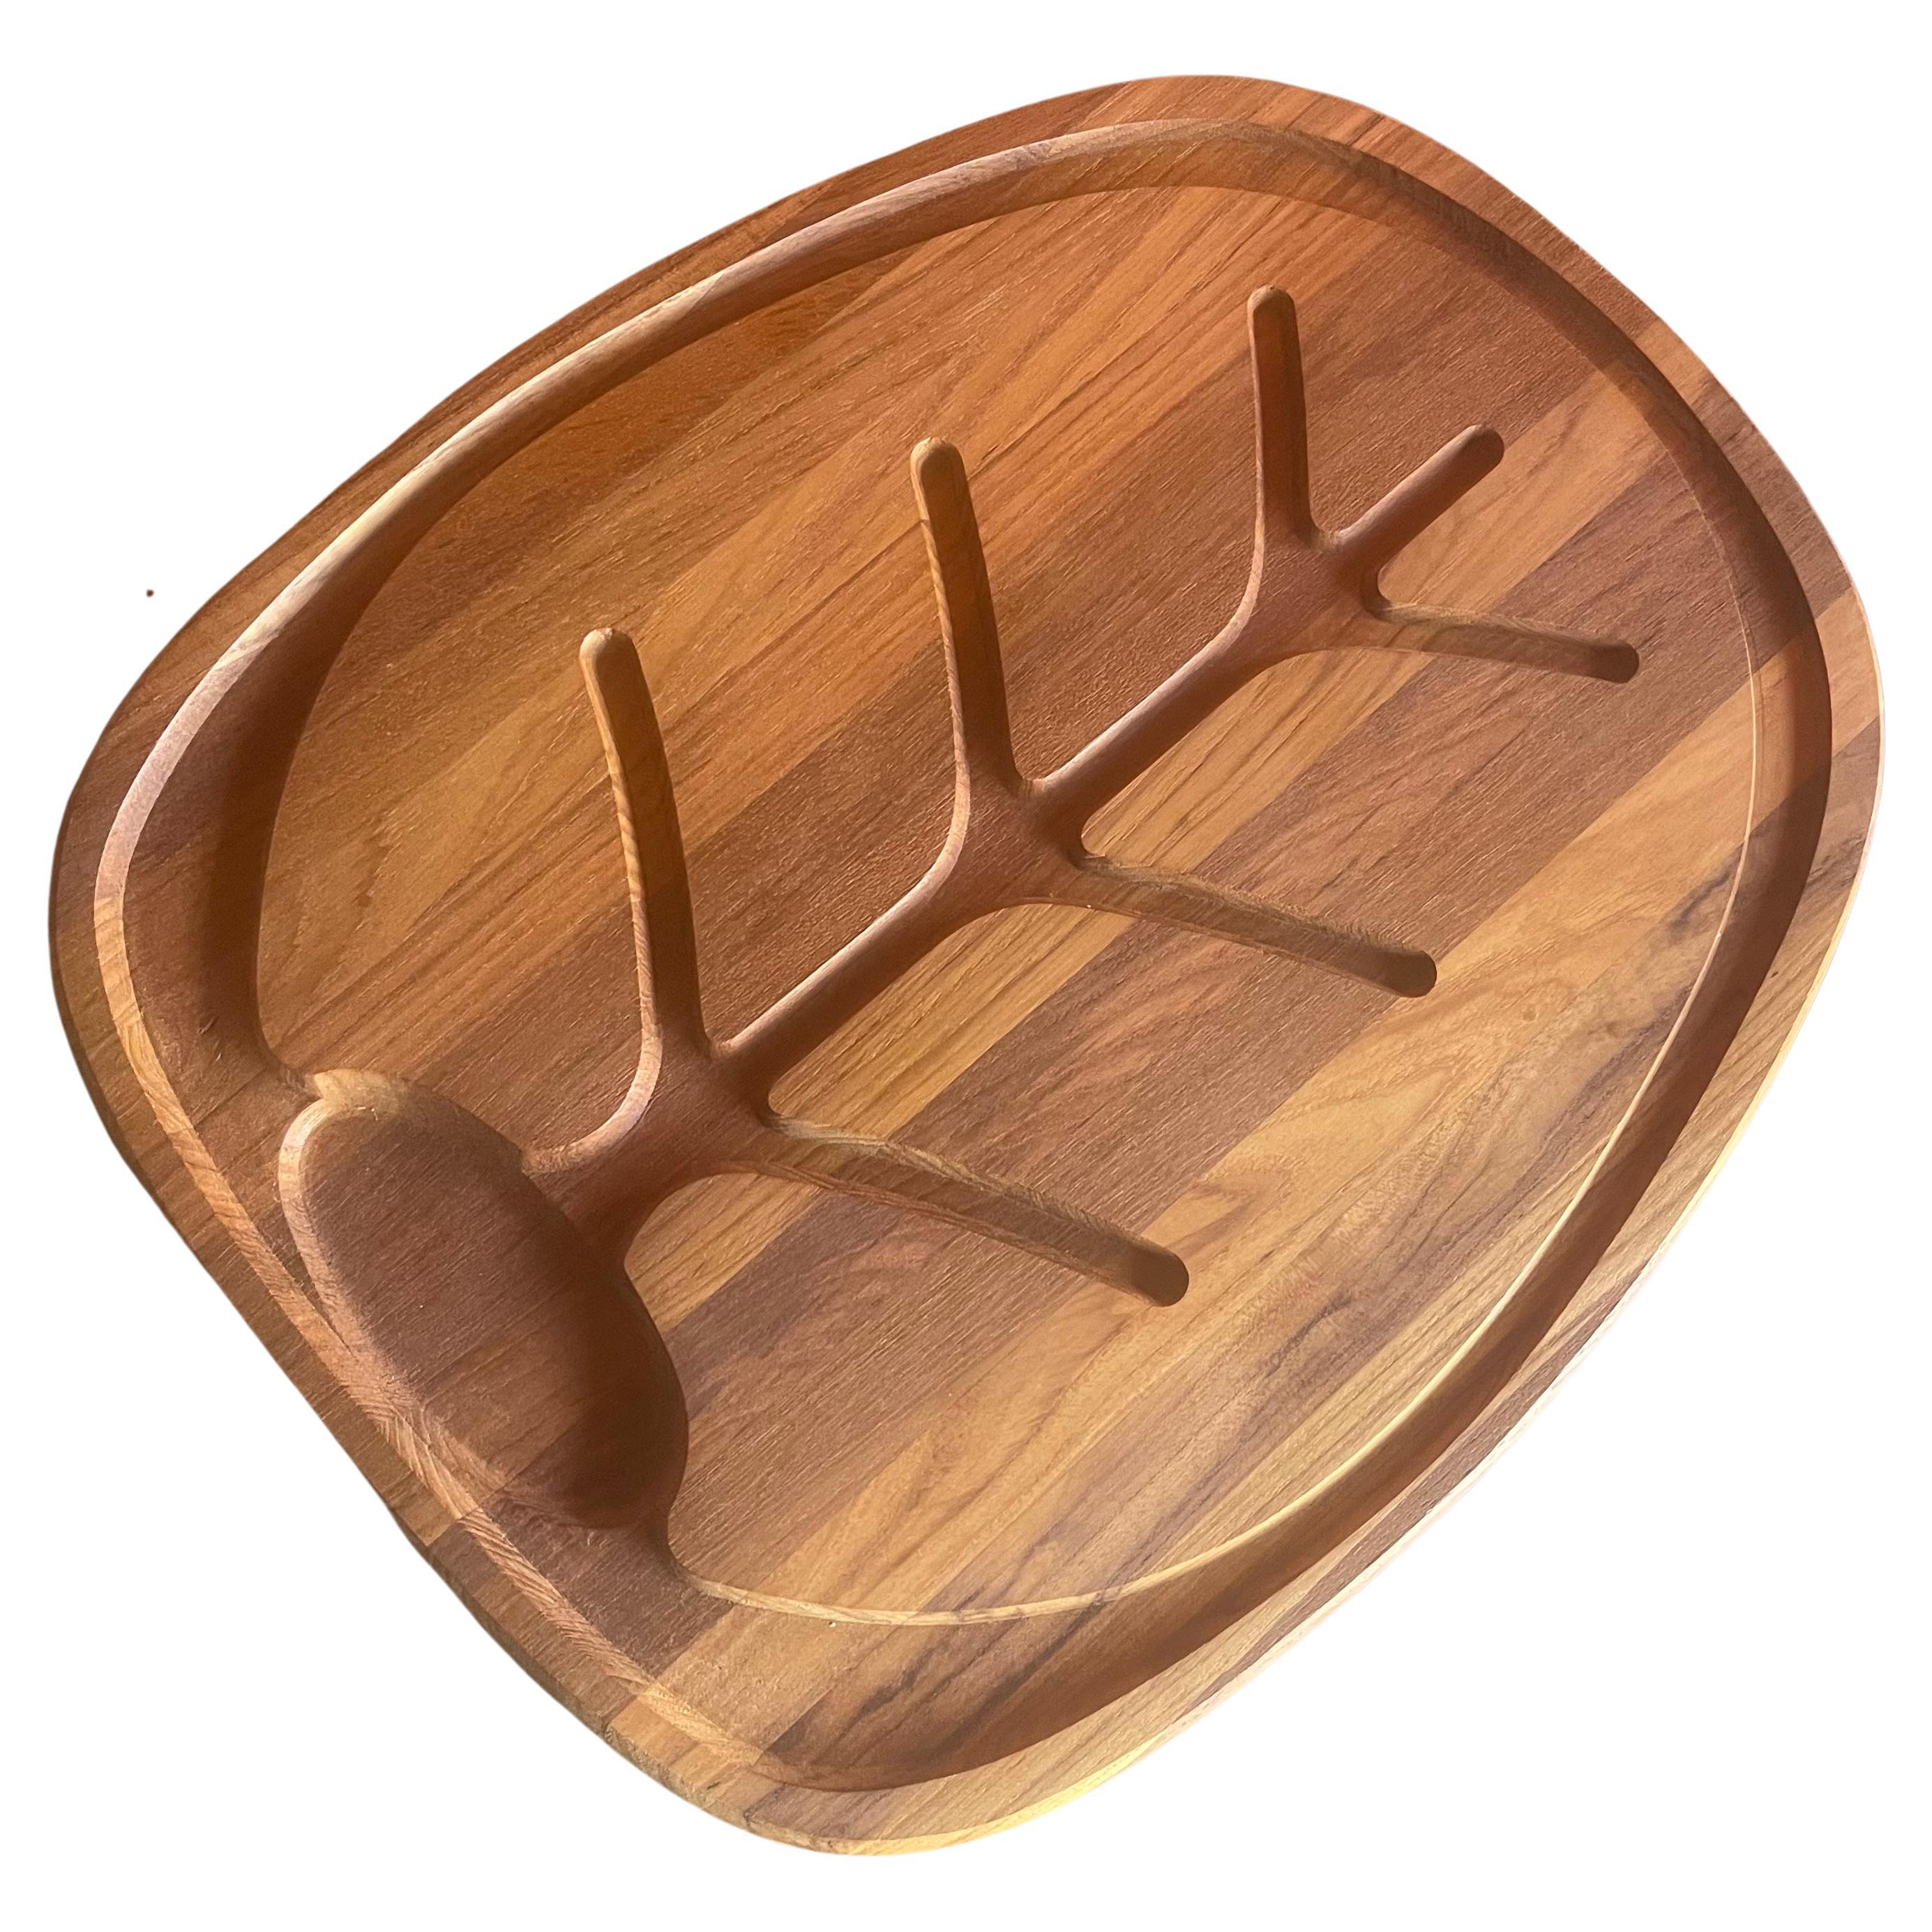 MCM Staved Teak Carving / Cutting Board New / Old Stock in Box by Selandia For Sale